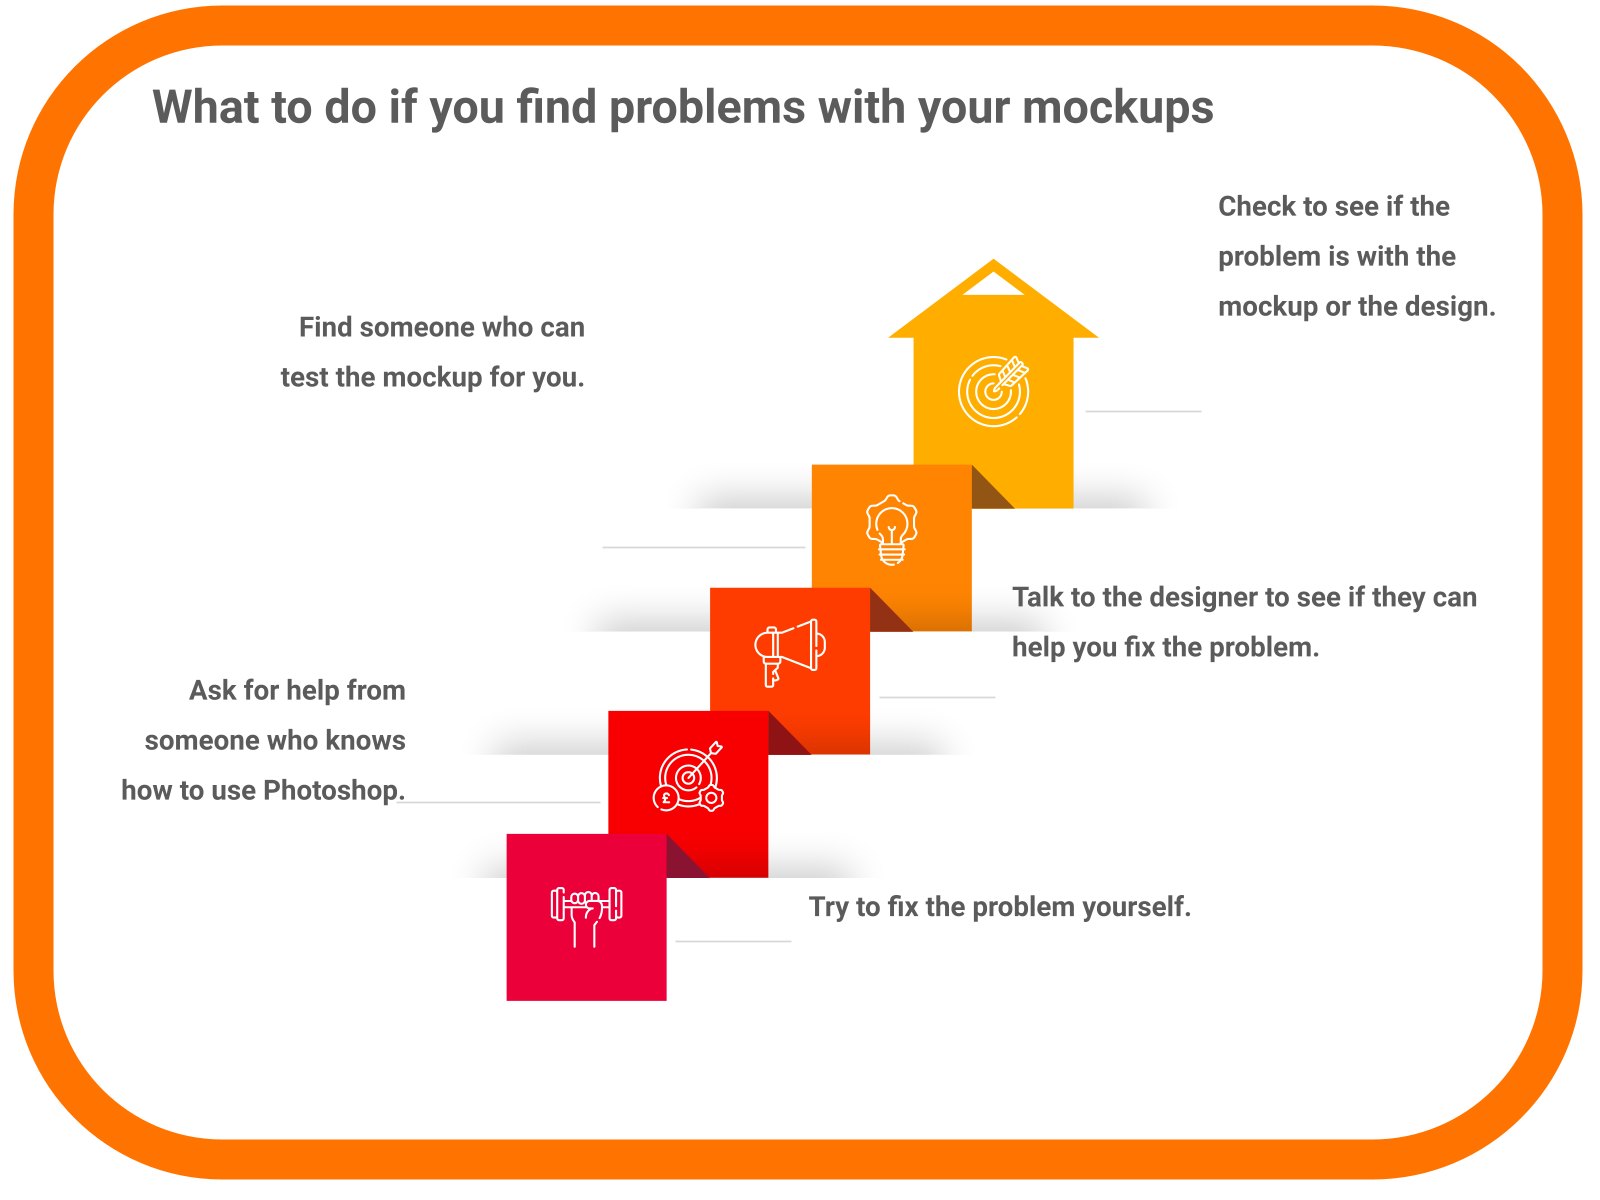 What to do if you find problems with your mockups